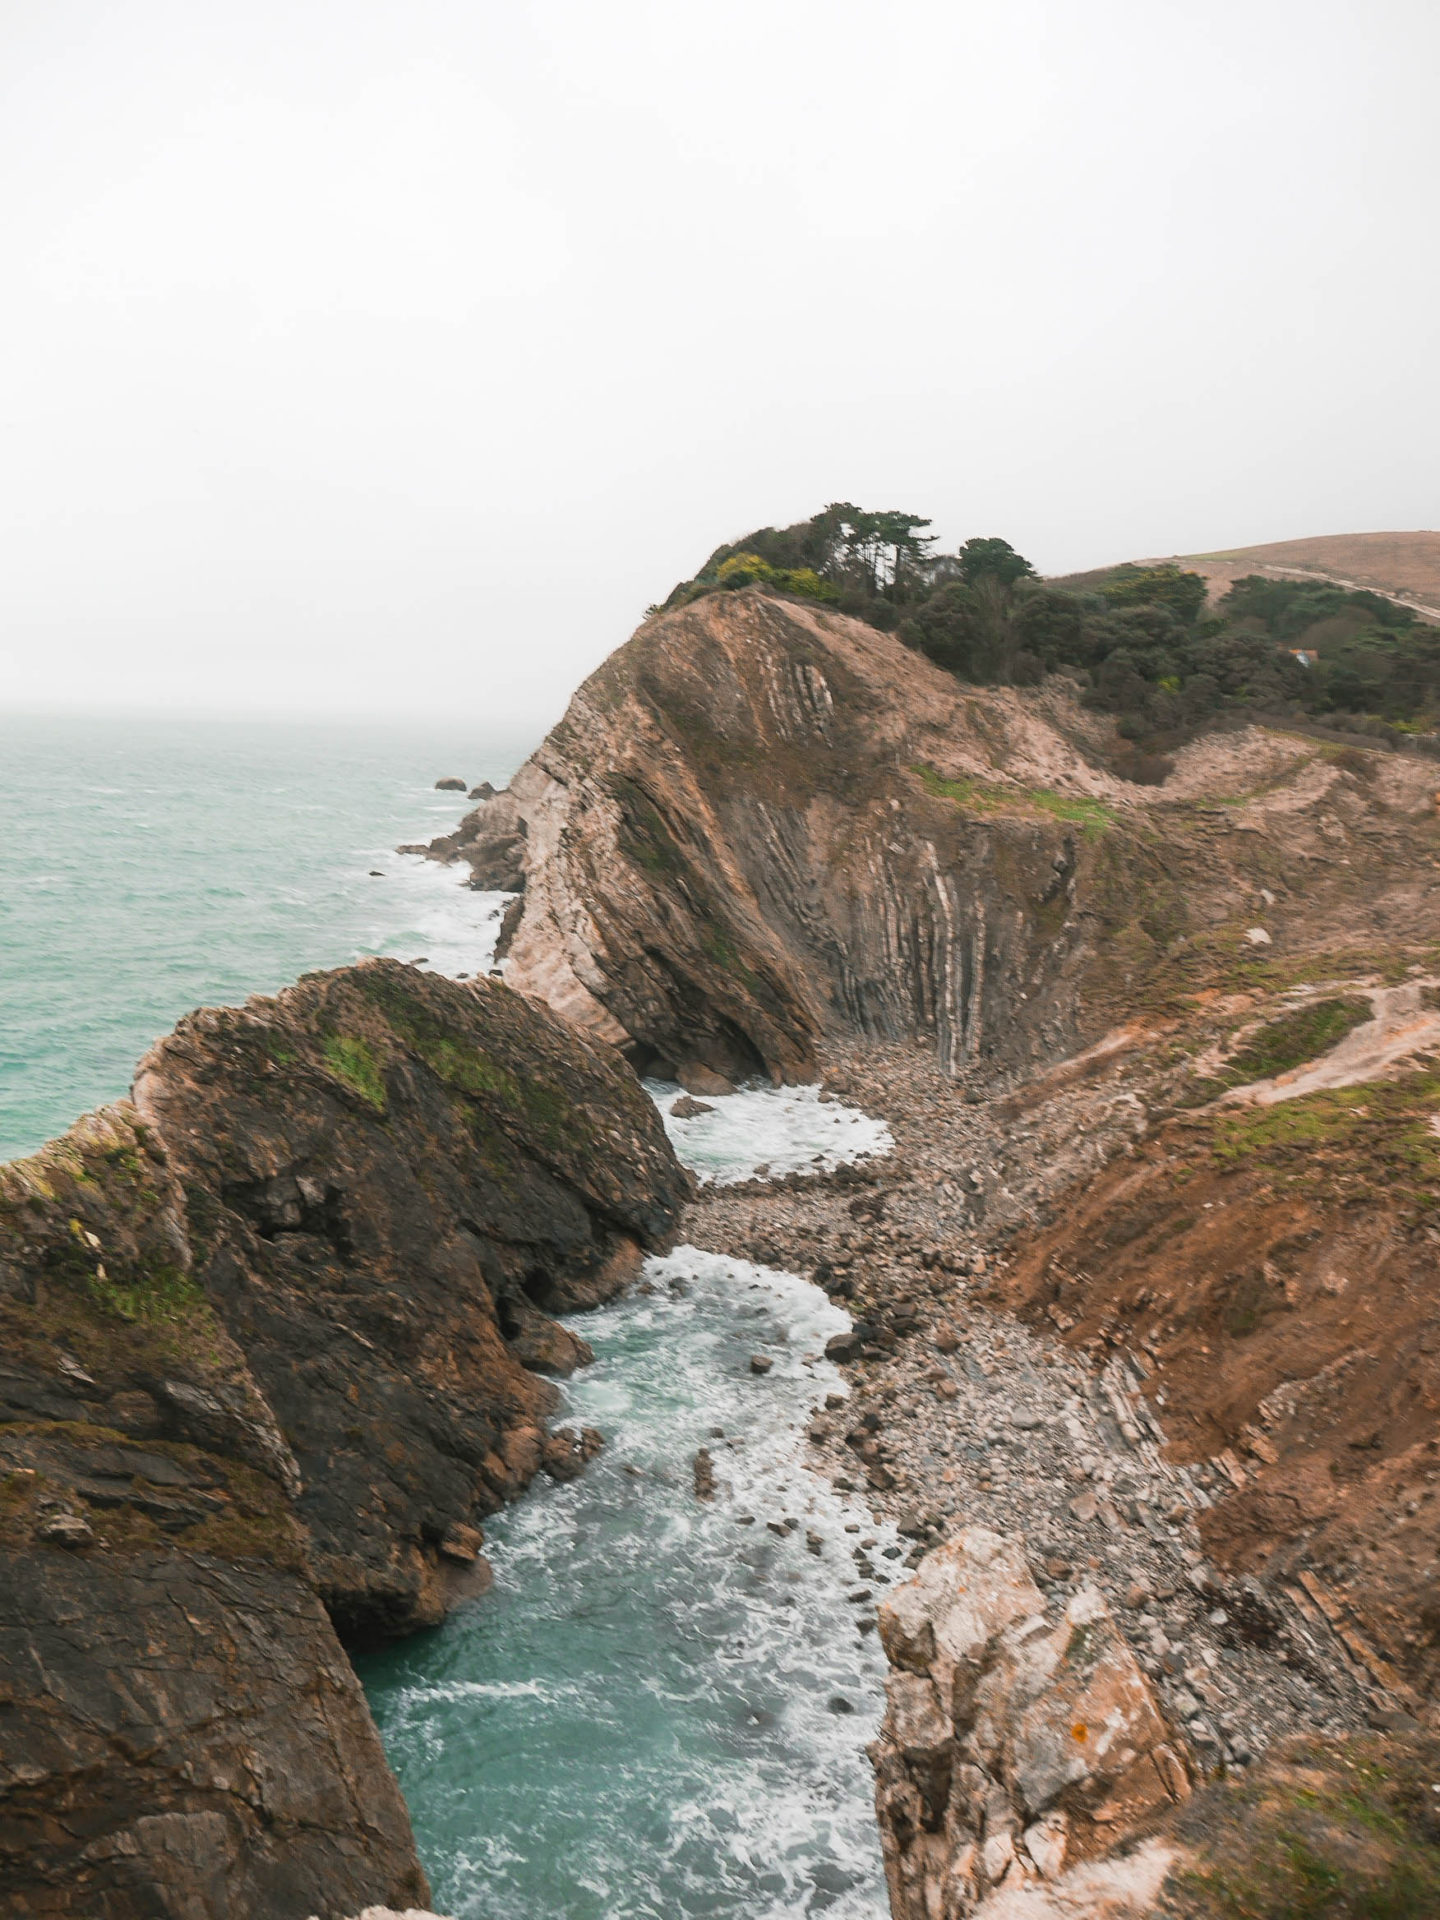 Hiking from Durdle Door to Lulworth Cove